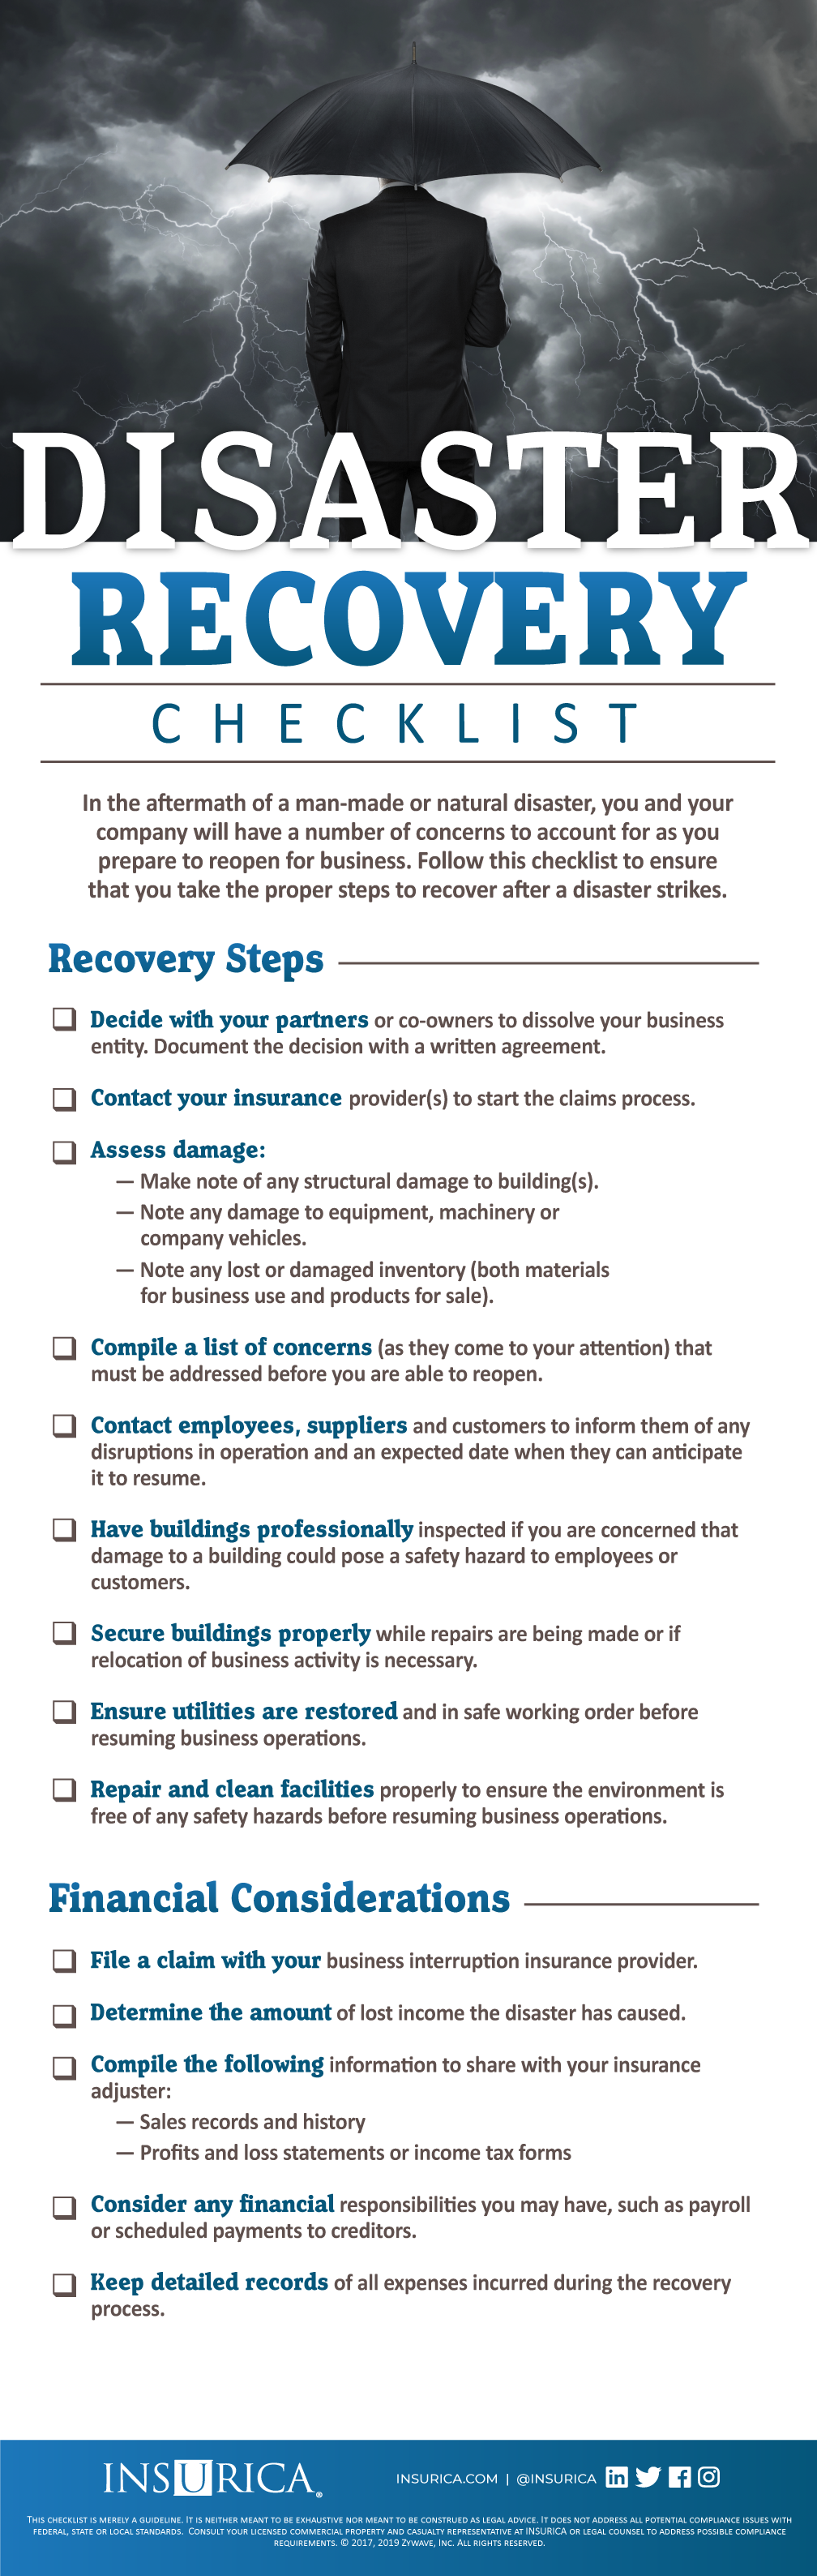 Disaster Recovery for Businesses